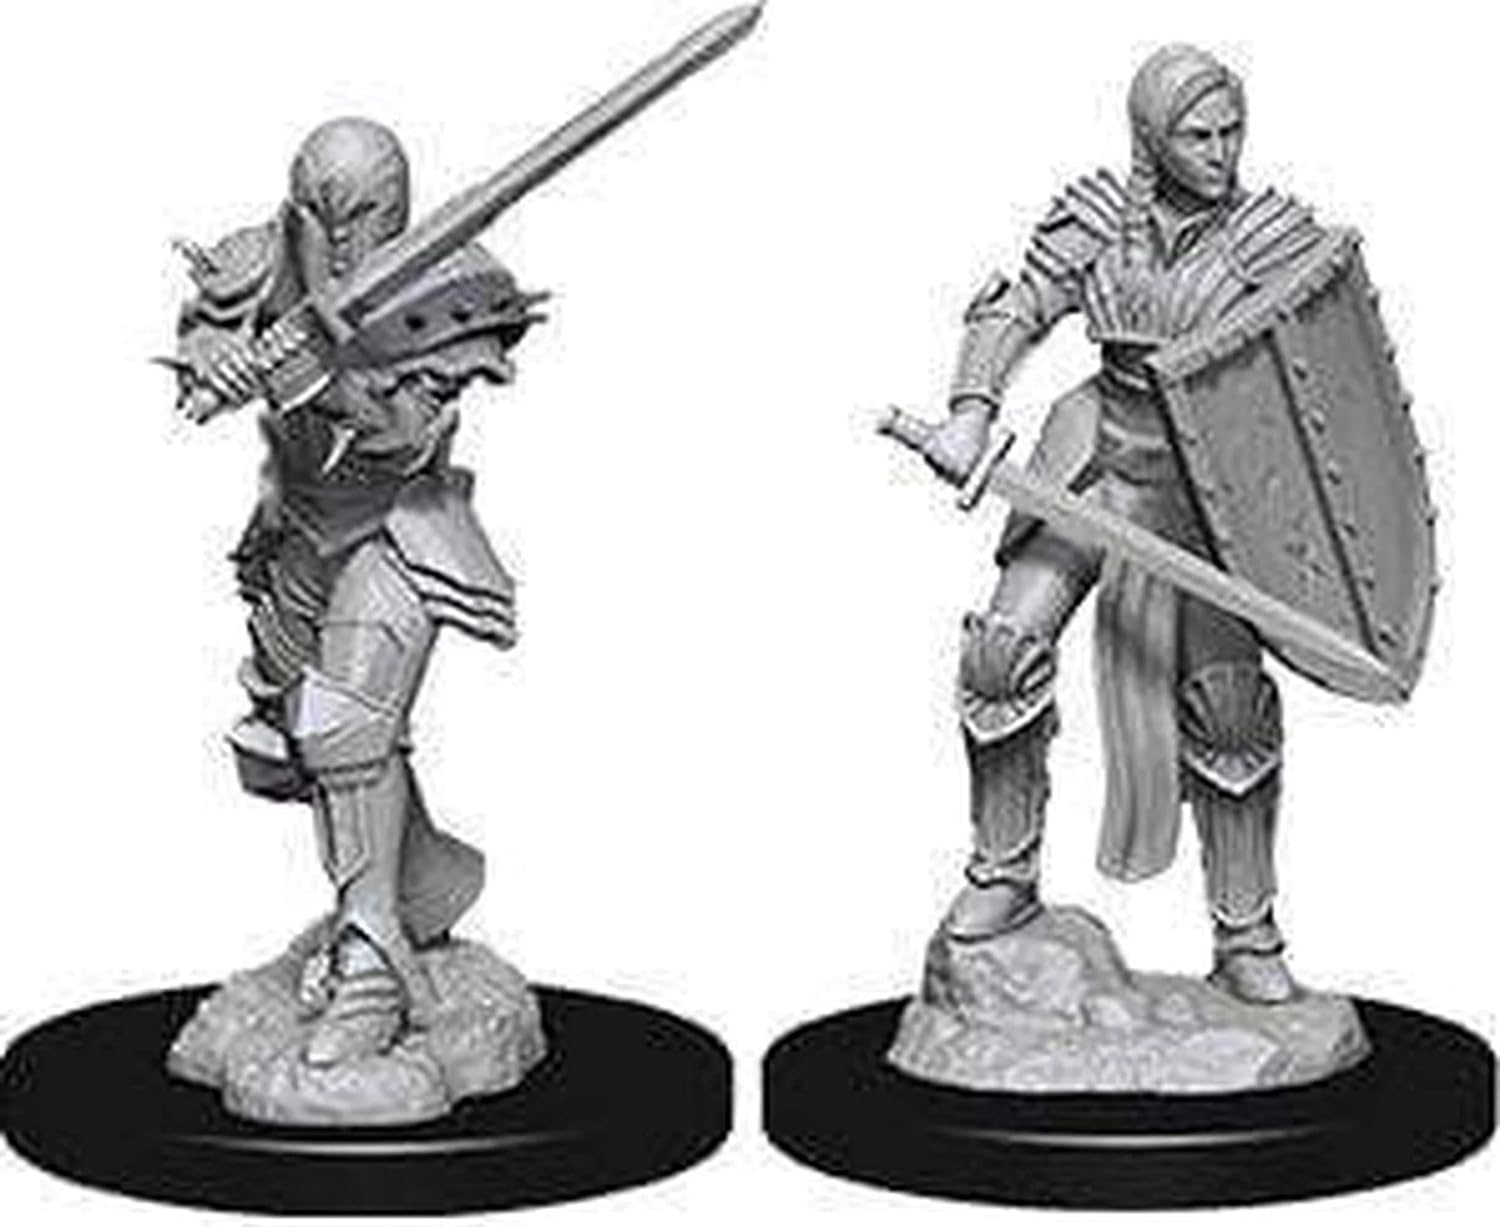 Female Human Fighter: D&D Nolzur's Marvelous Unpainted Miniatures (W9) - Loaded Dice Barry Vale of Glamorgan CF64 3HD